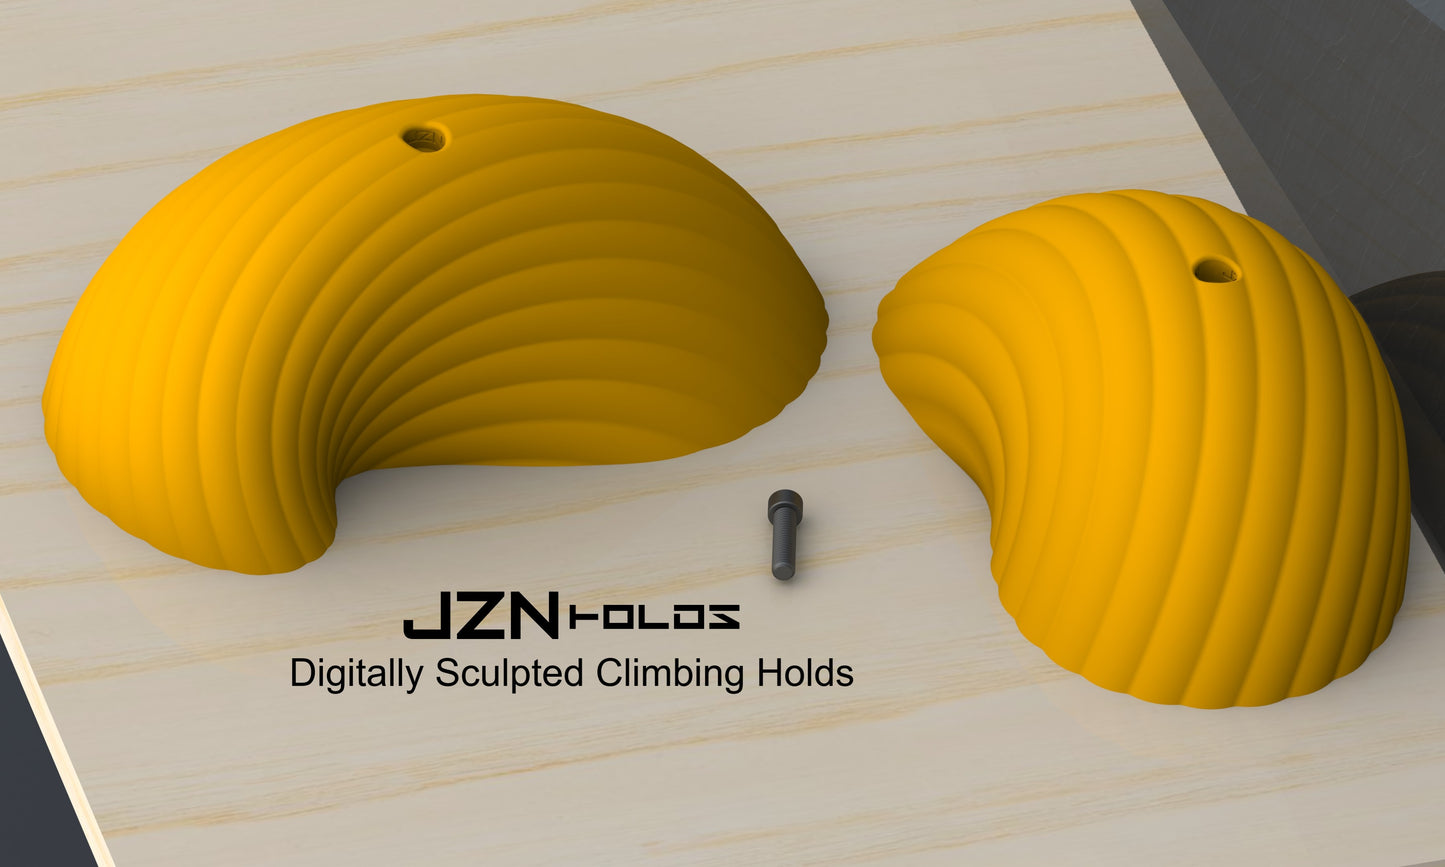 Bolt On Climbing Holds, The Swarm Slopers